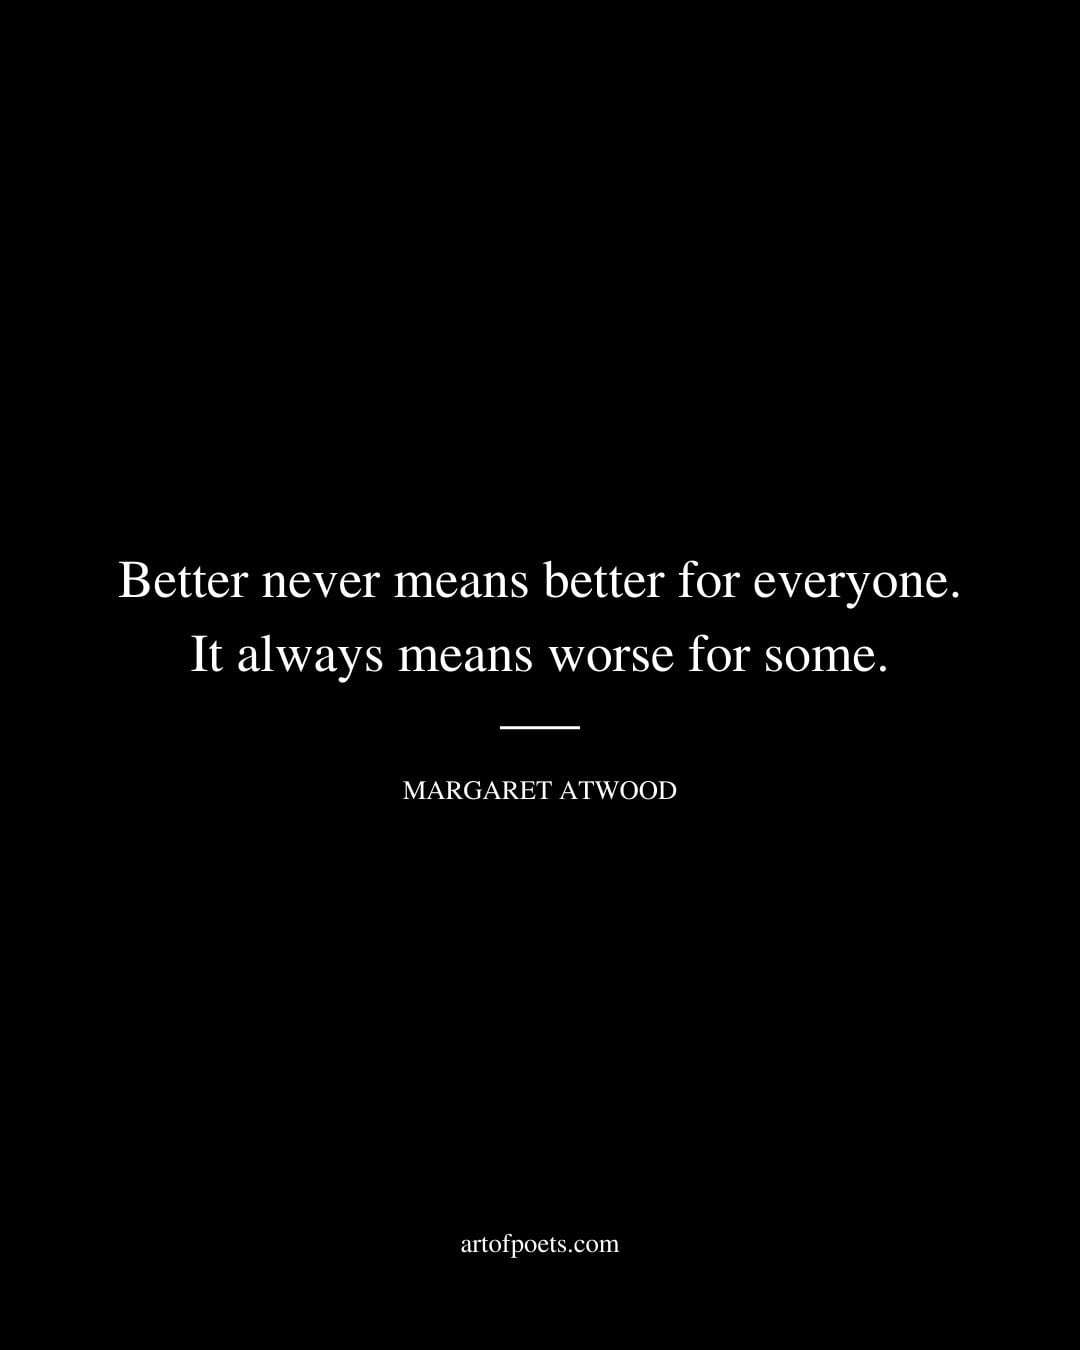 Better never means better for everyone. It always means worse for some. Margaret Atwood